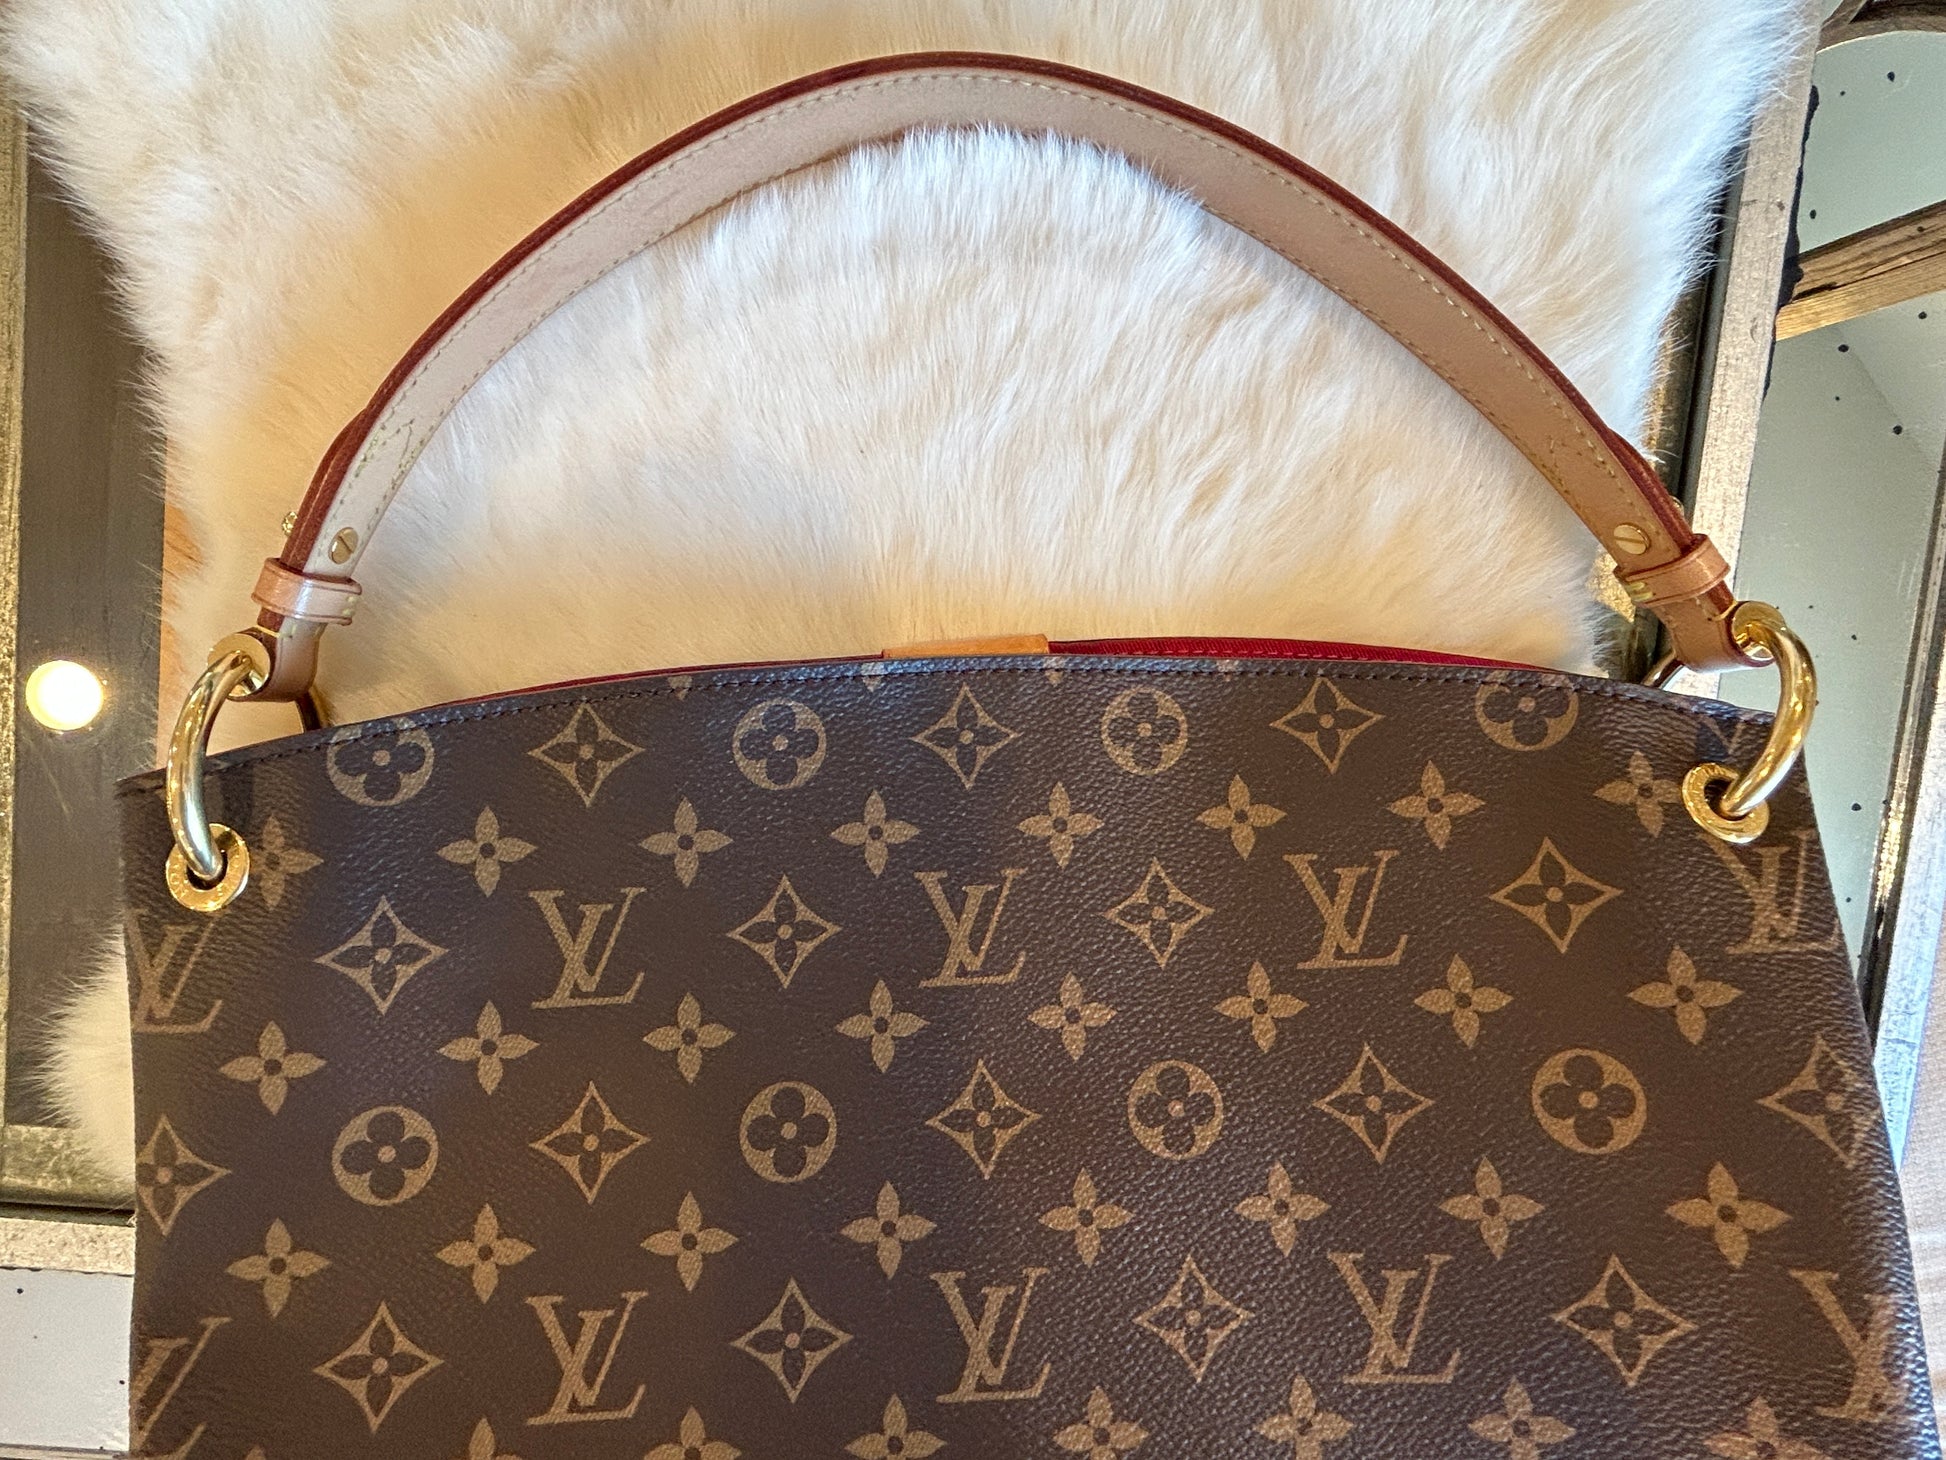 Louis Vuitton Graceful PM Monogram with Peony Pink Interior